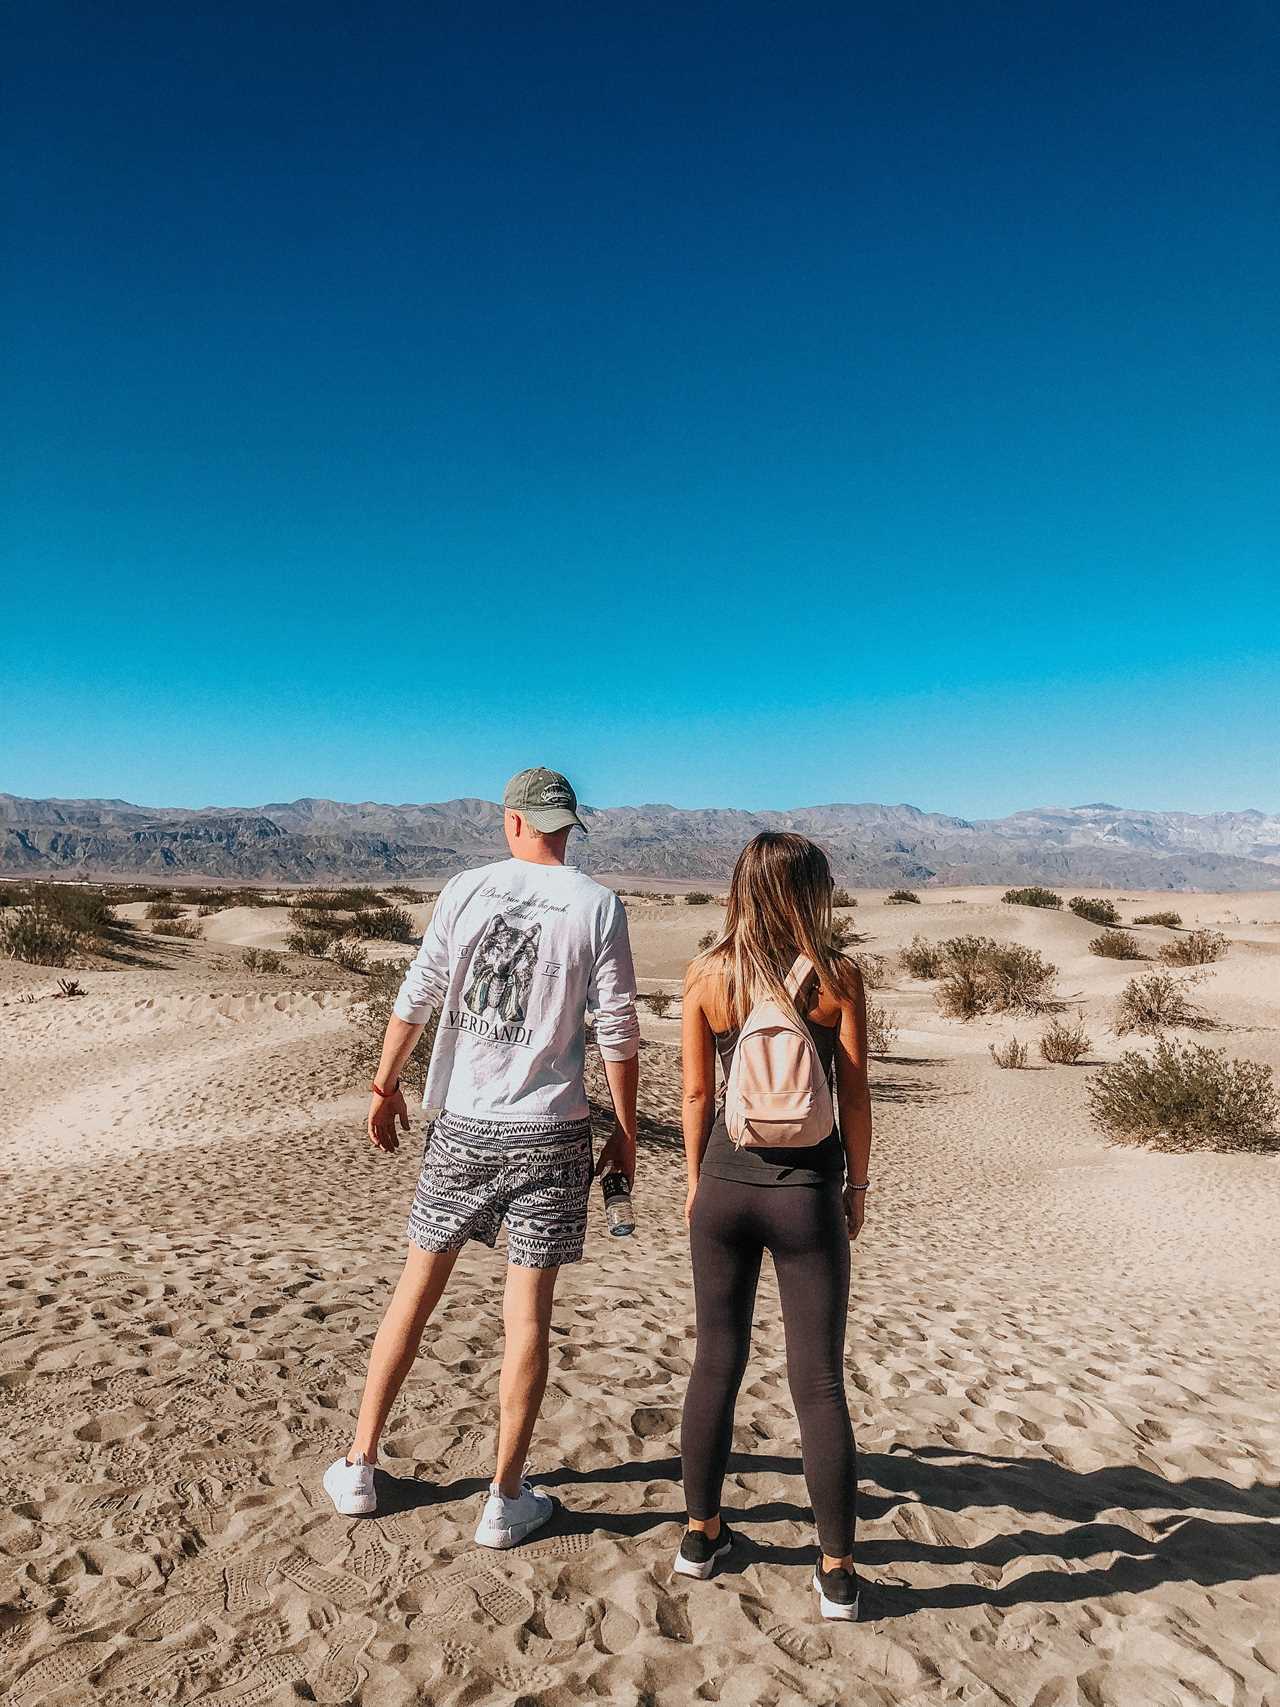 Hikers on a sandy landscape evaluate the way ahead.